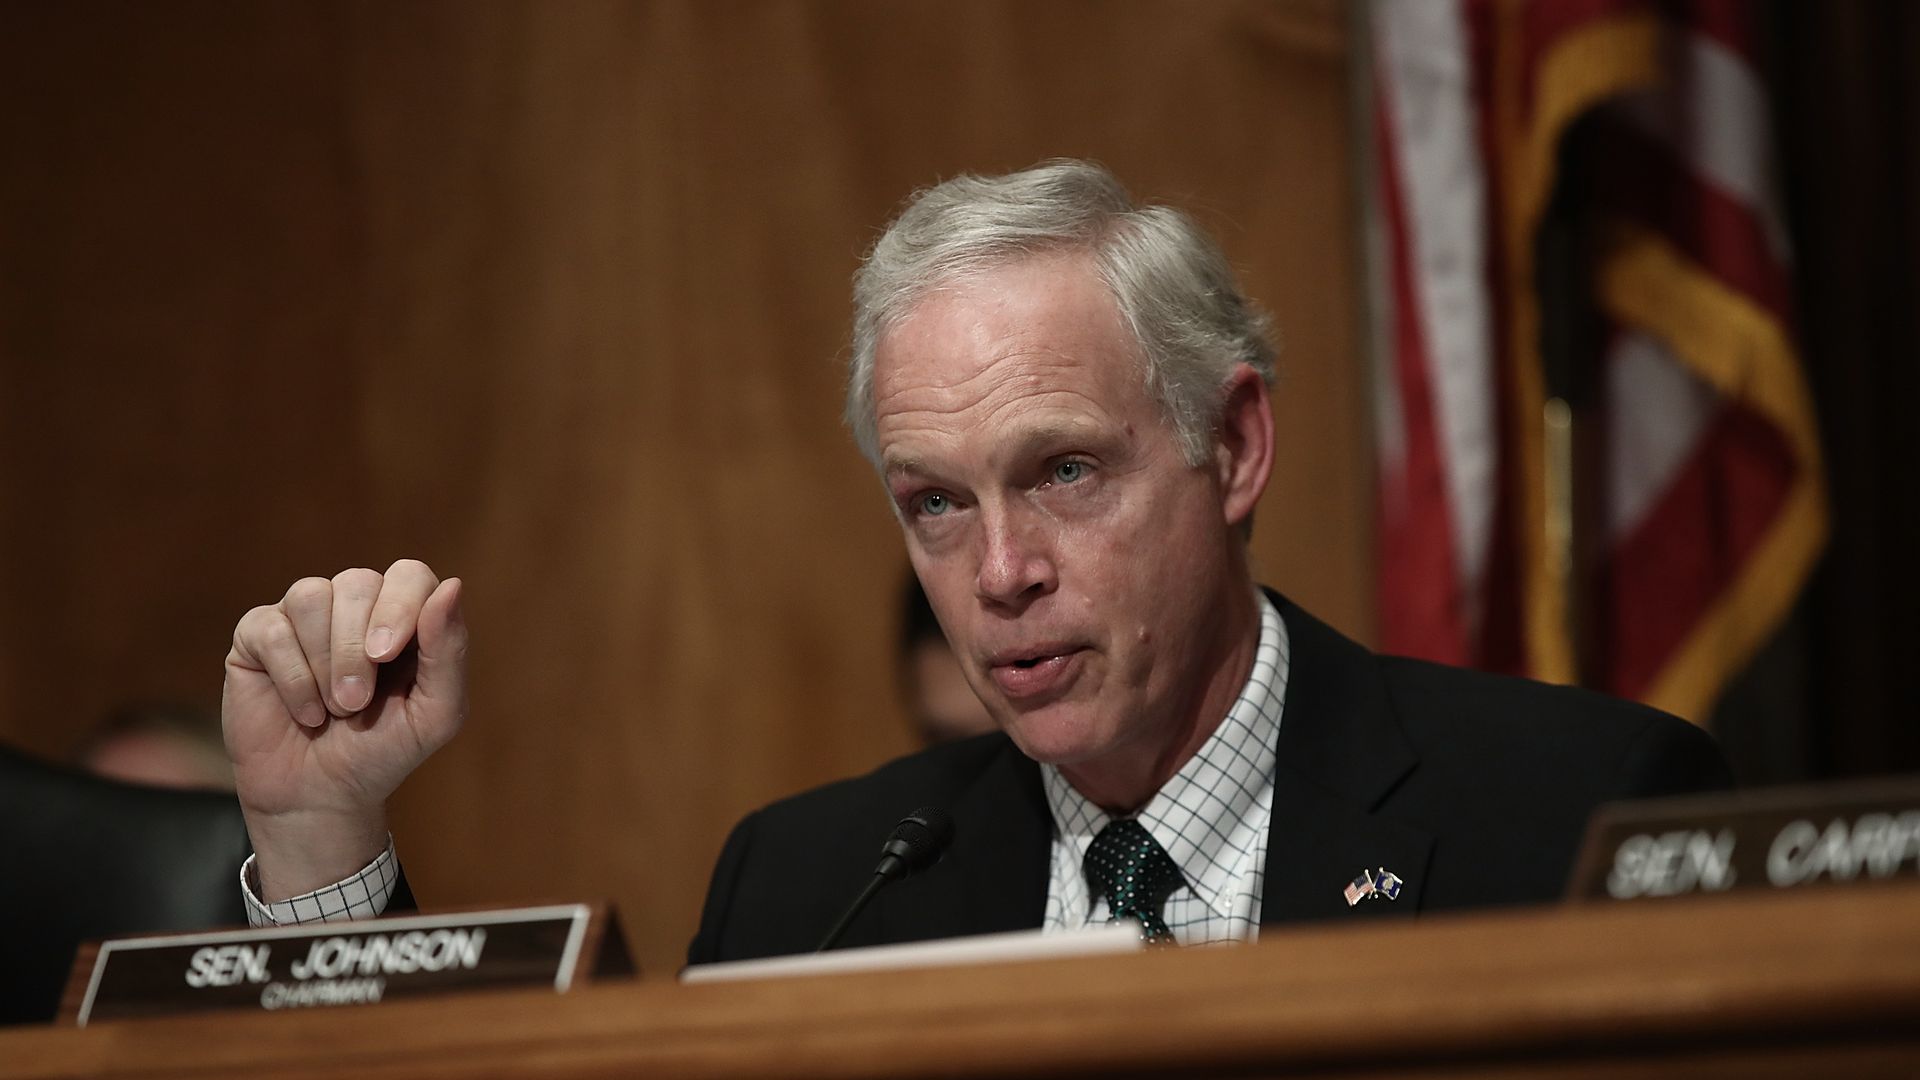 Senator Ron Johnson sits in front of his nameplate on a dais.